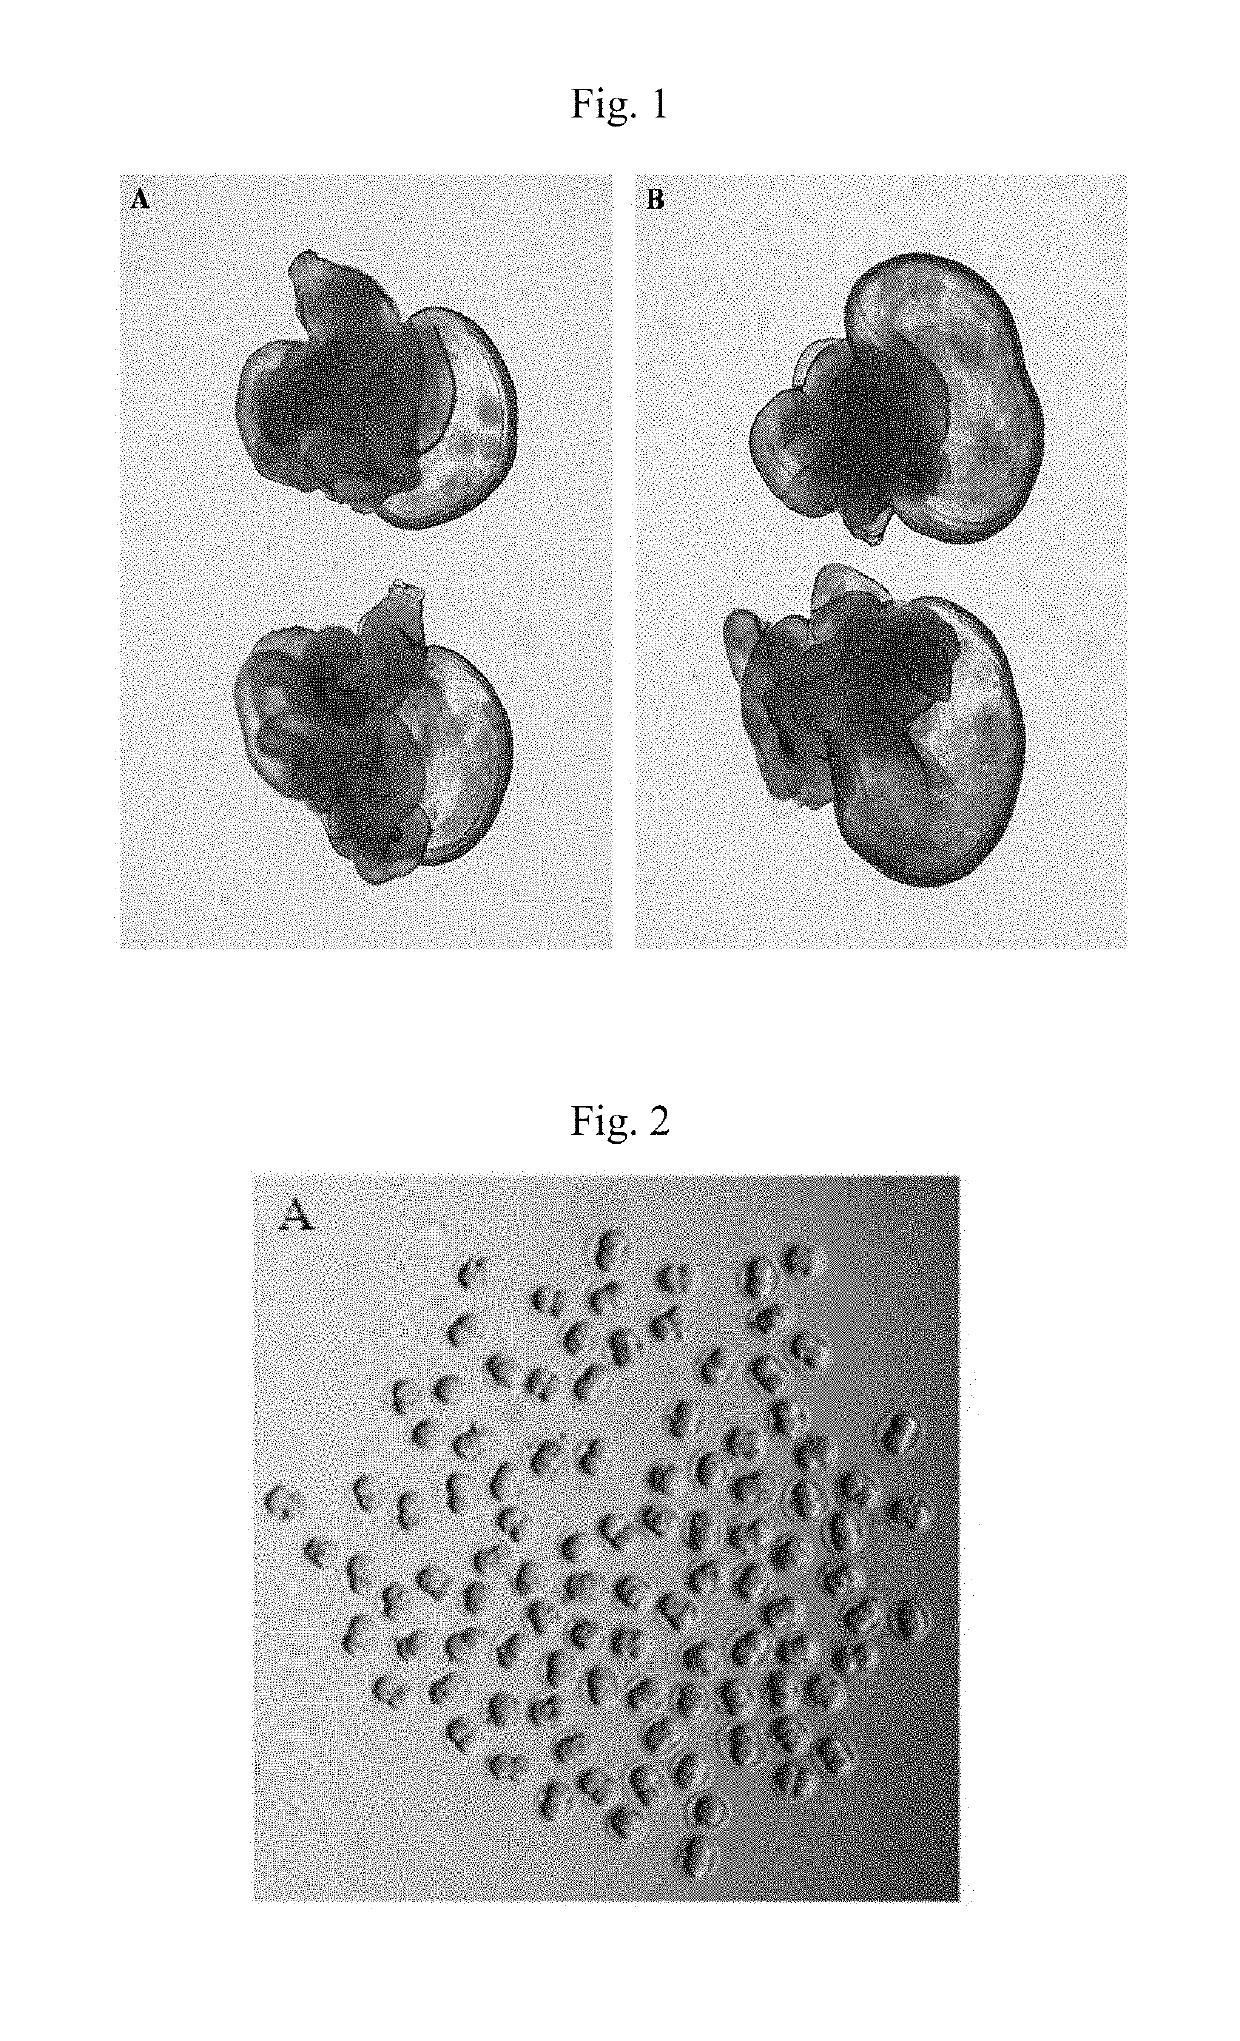 Superovulation in mice comprising administration of anti-inhibin serum and equine chorionic gonadotropin